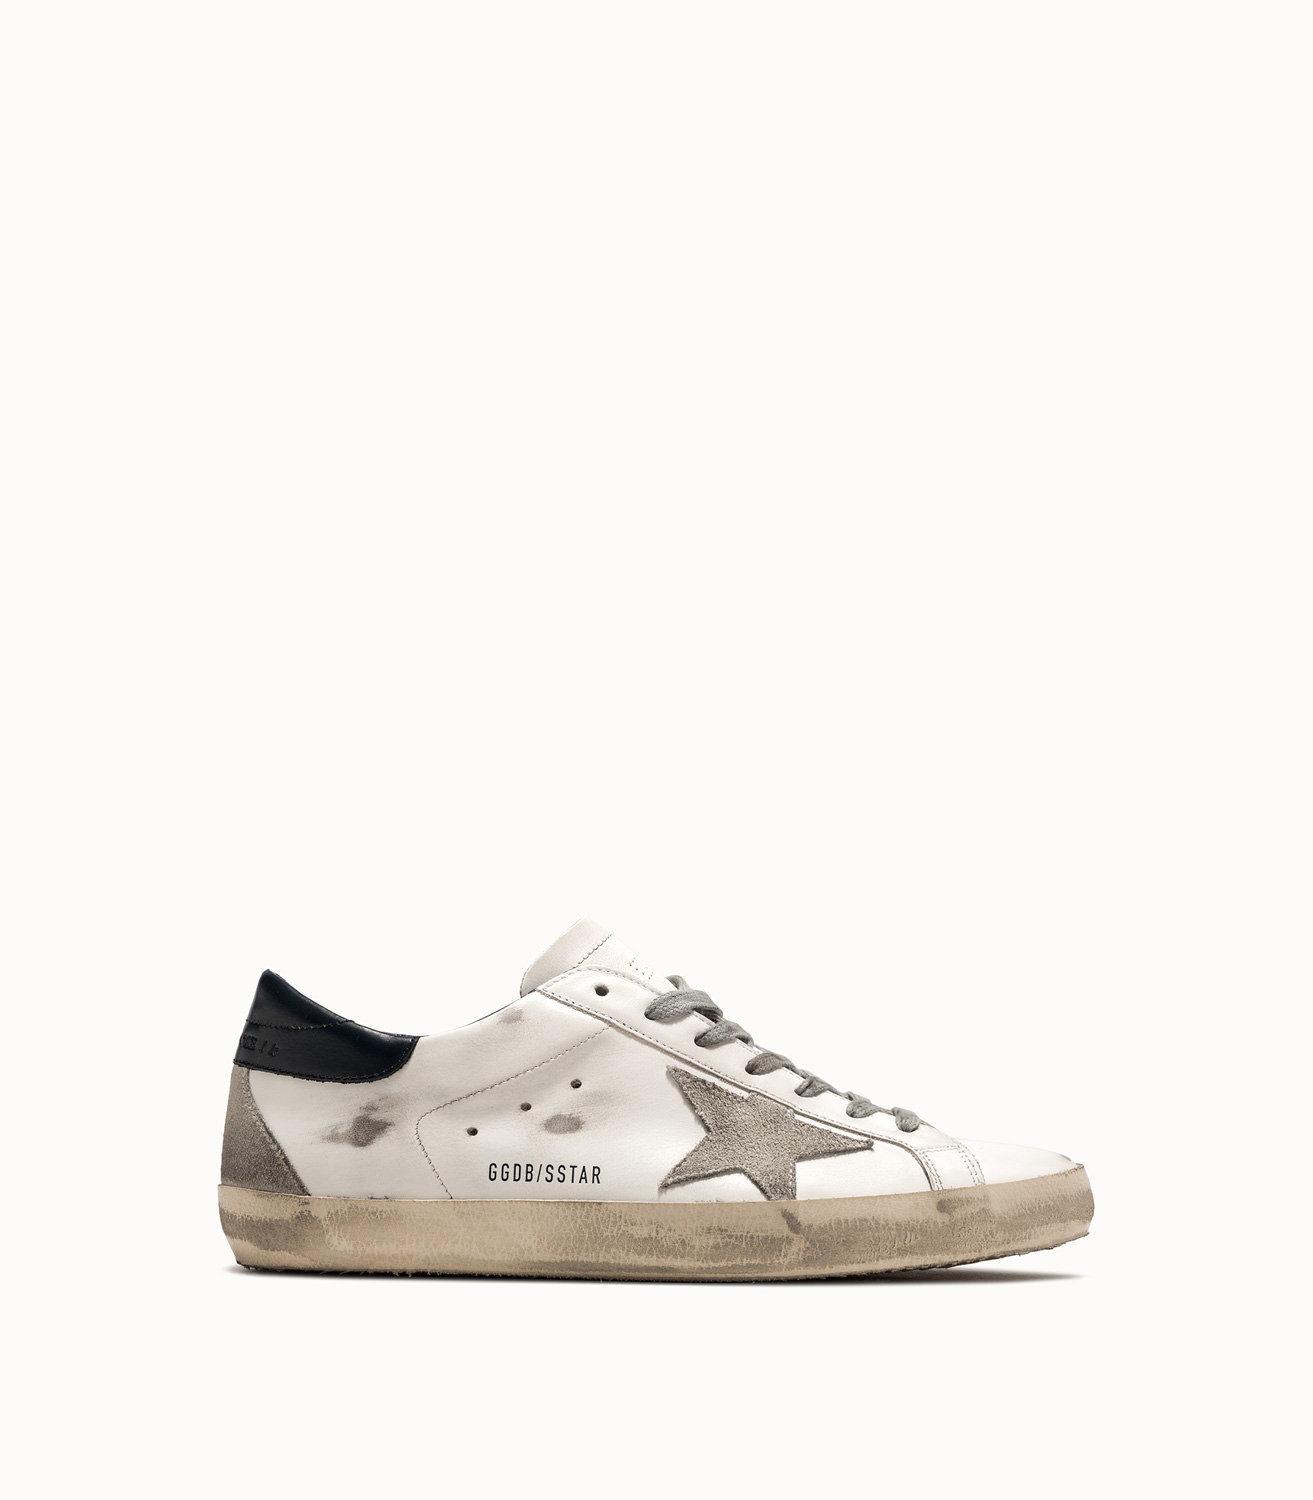 golden goose sneakers white and black